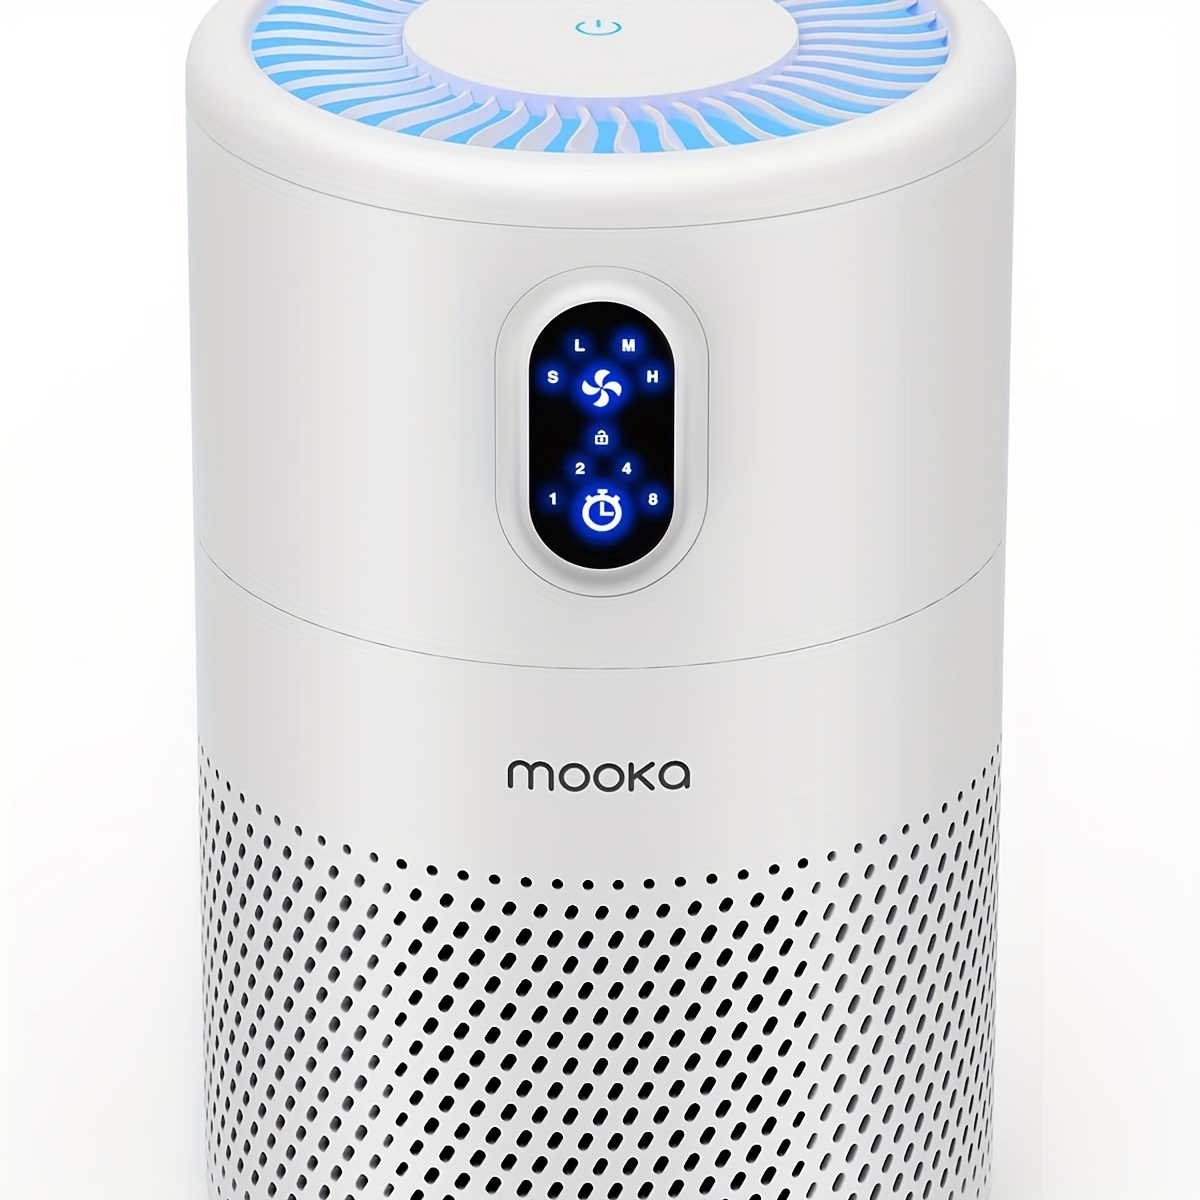 

Mooka Air Purifiers For Home Large Room Up To 1076ft², H13 True Hepa Air Filter Cleaner, Odor Eliminator, Remove Smoke Dust Pollen Pet Dander, Night Light (available For California)